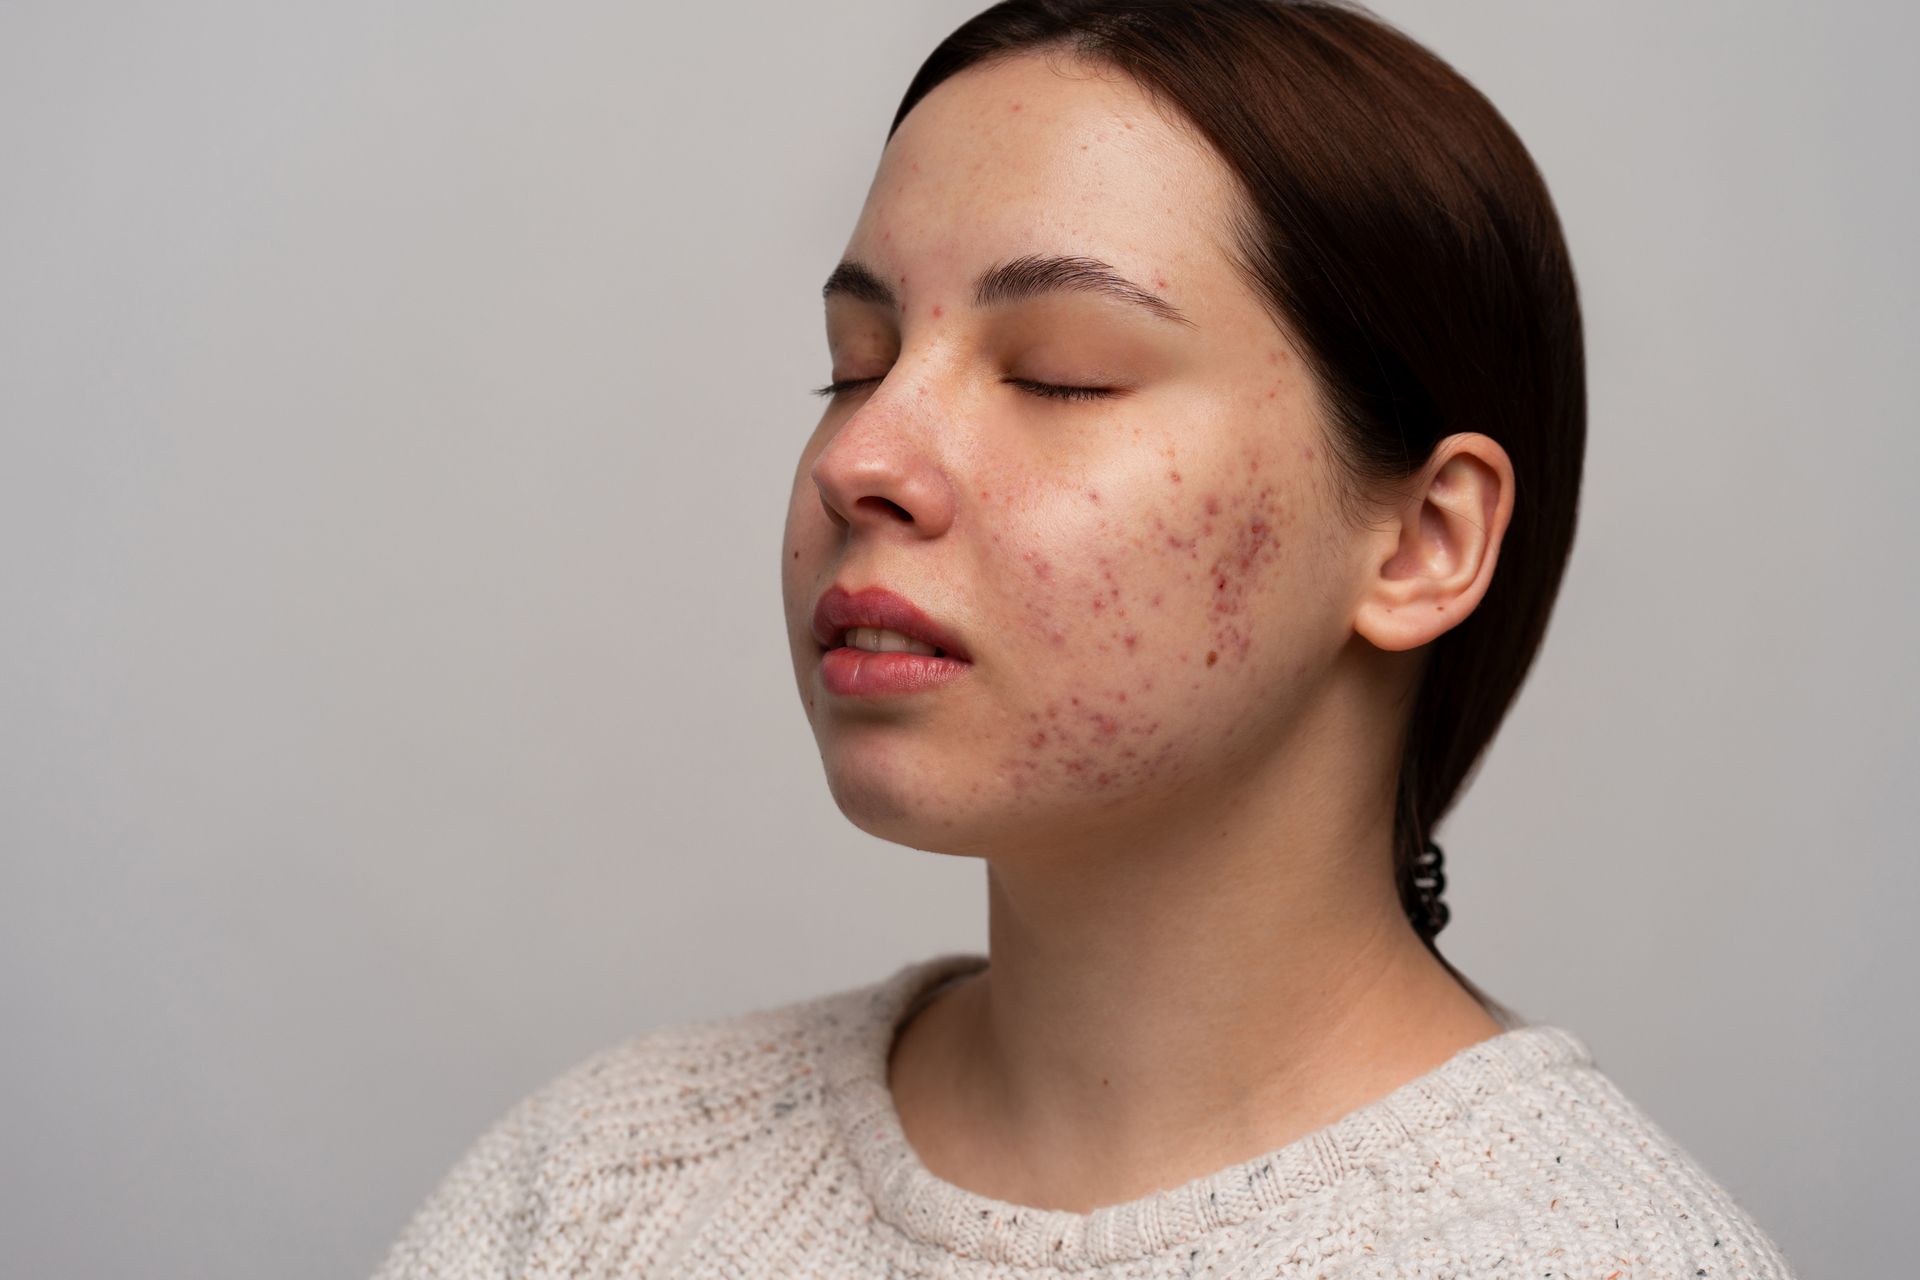 a woman with acne on her face has her eyes closed